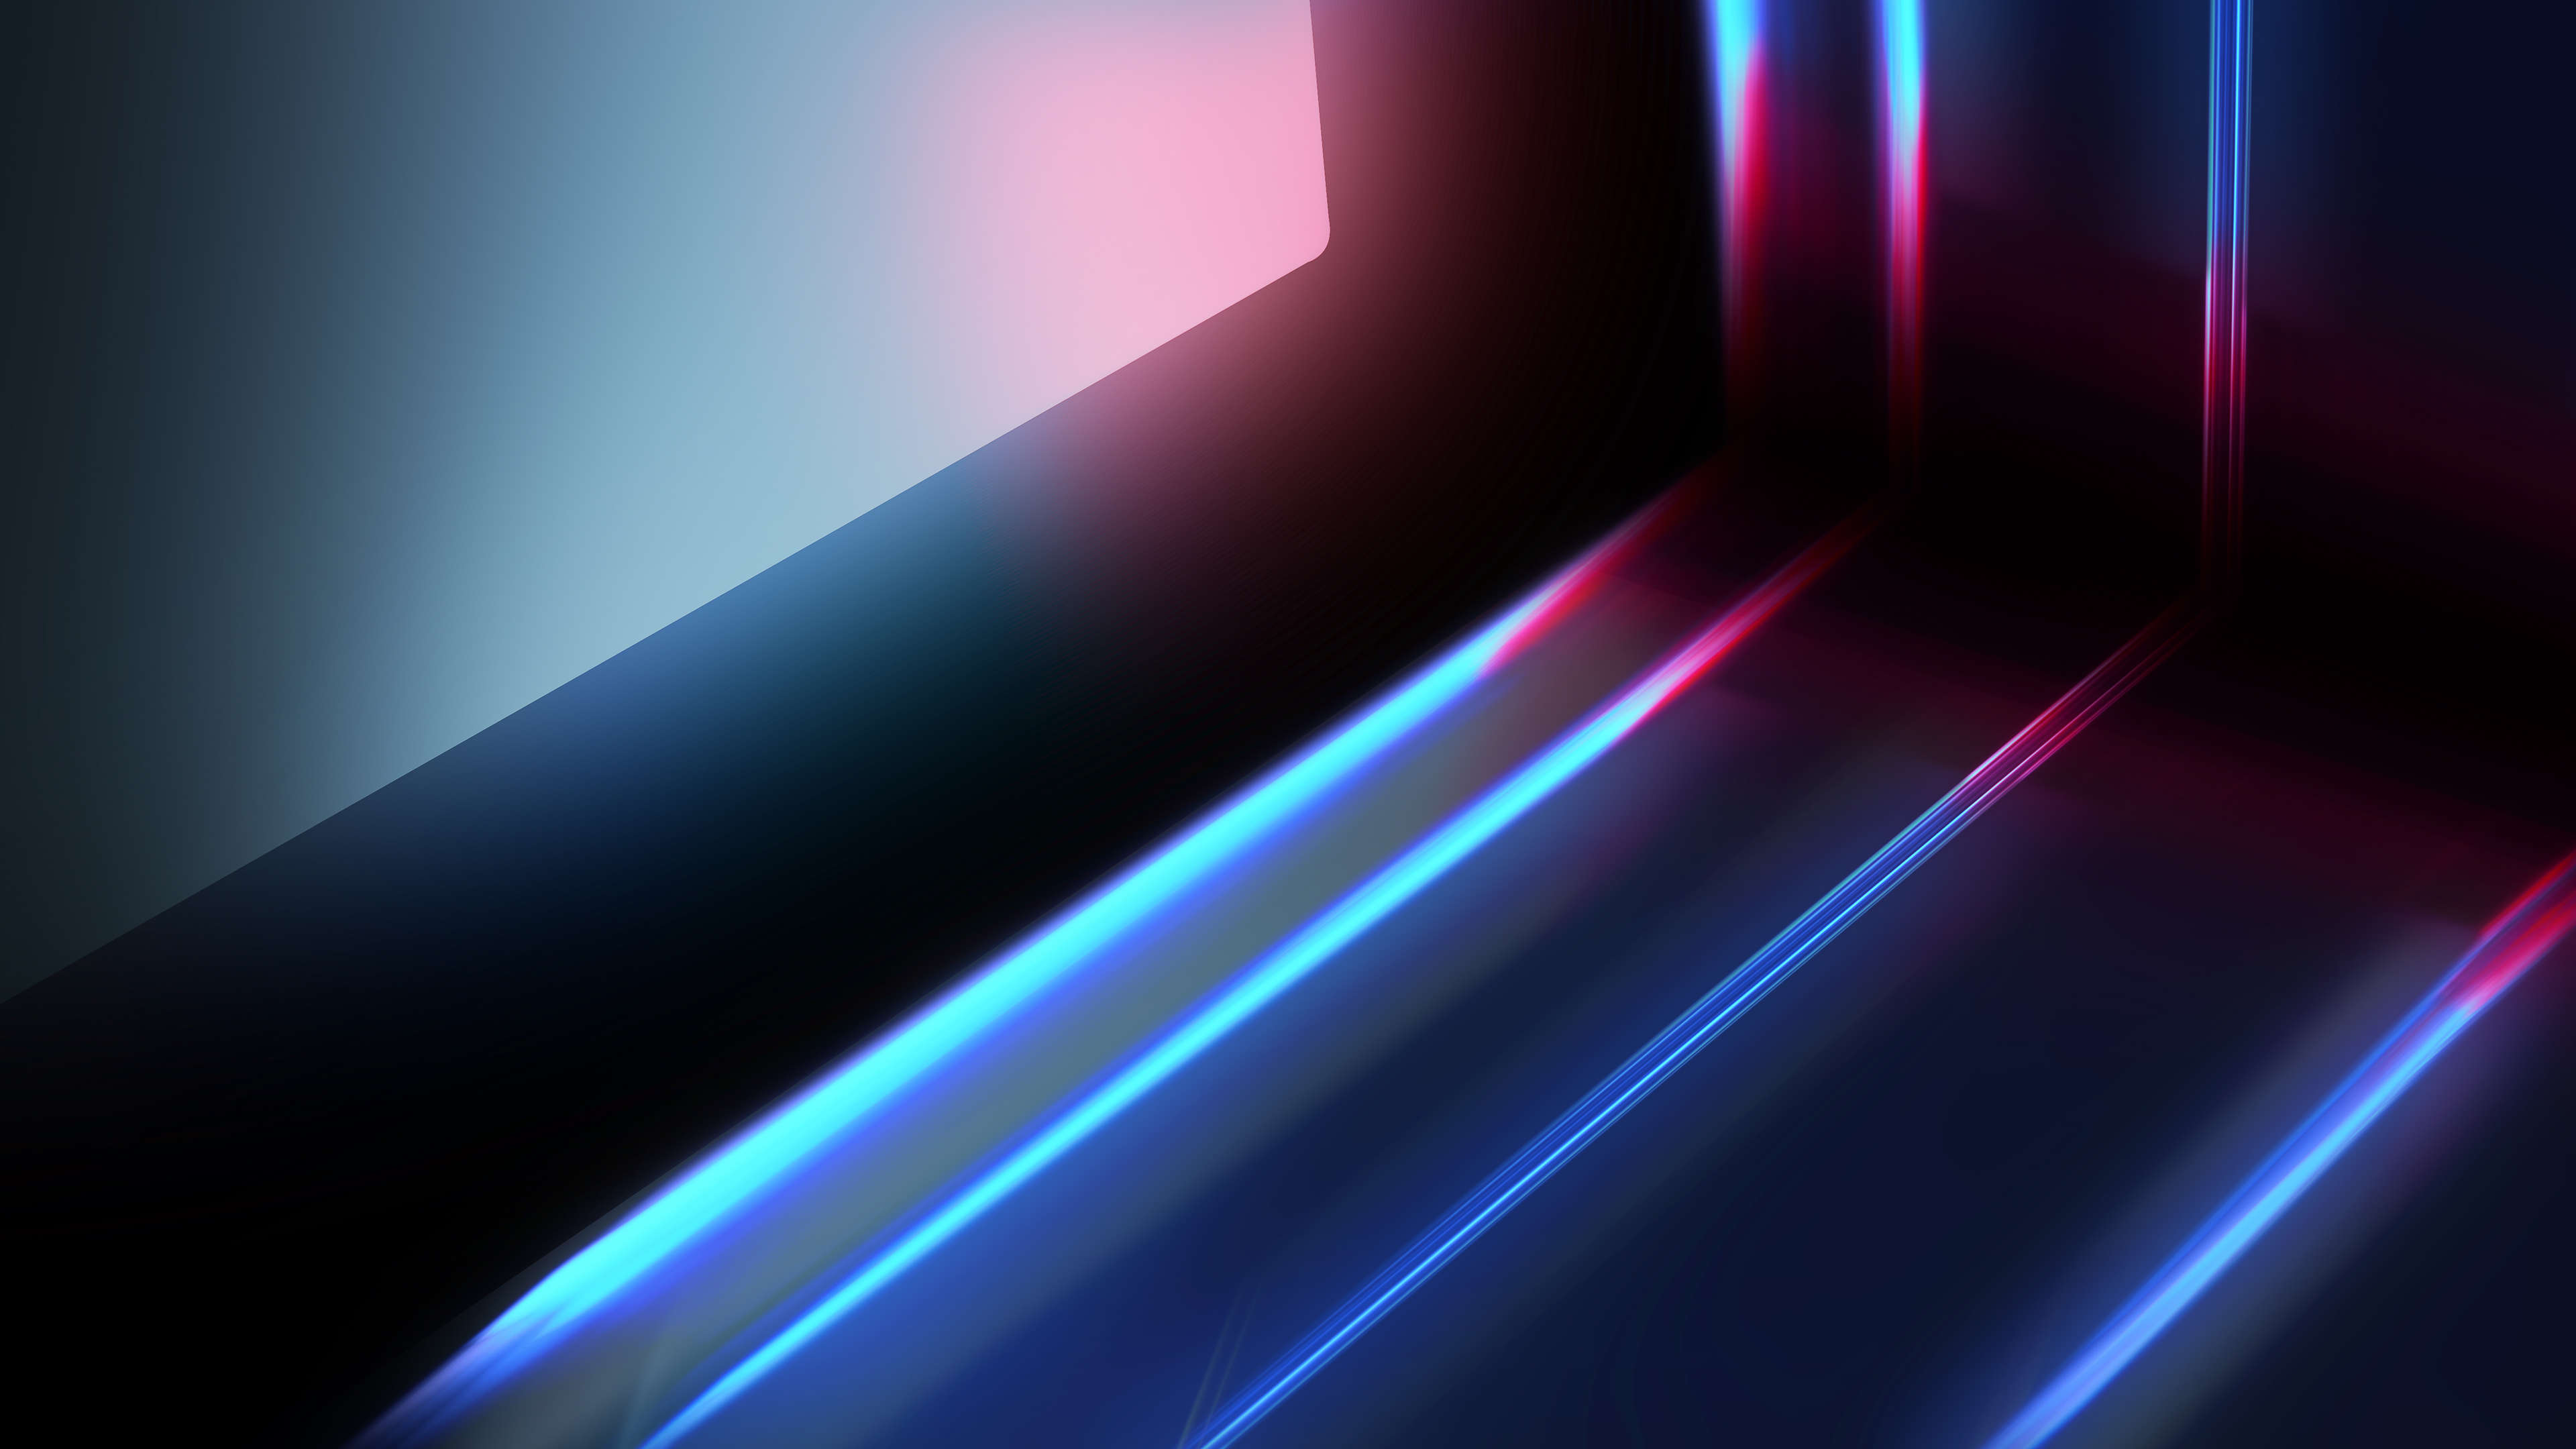 Abstract Neon Light Background, Abstract Wallpaper, 4k Wallpaper, Neon  Wallpaper Background Image And Wallpaper for Free Download